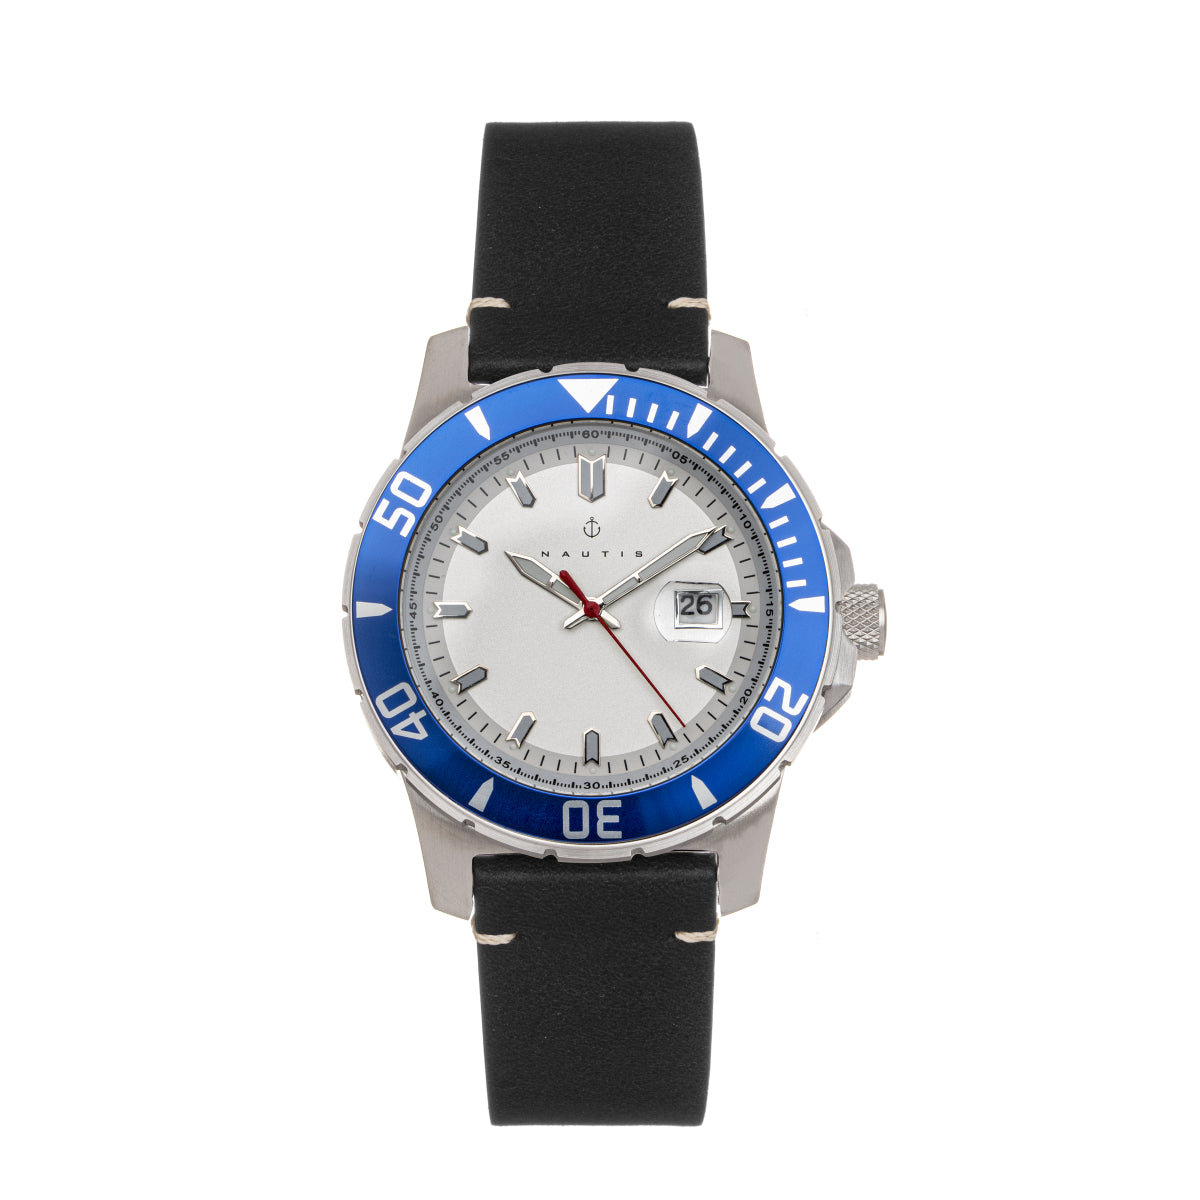 Nautis Dive Pro 200 Leather-Band Watch w/Date - Blue/White - GL1909-D